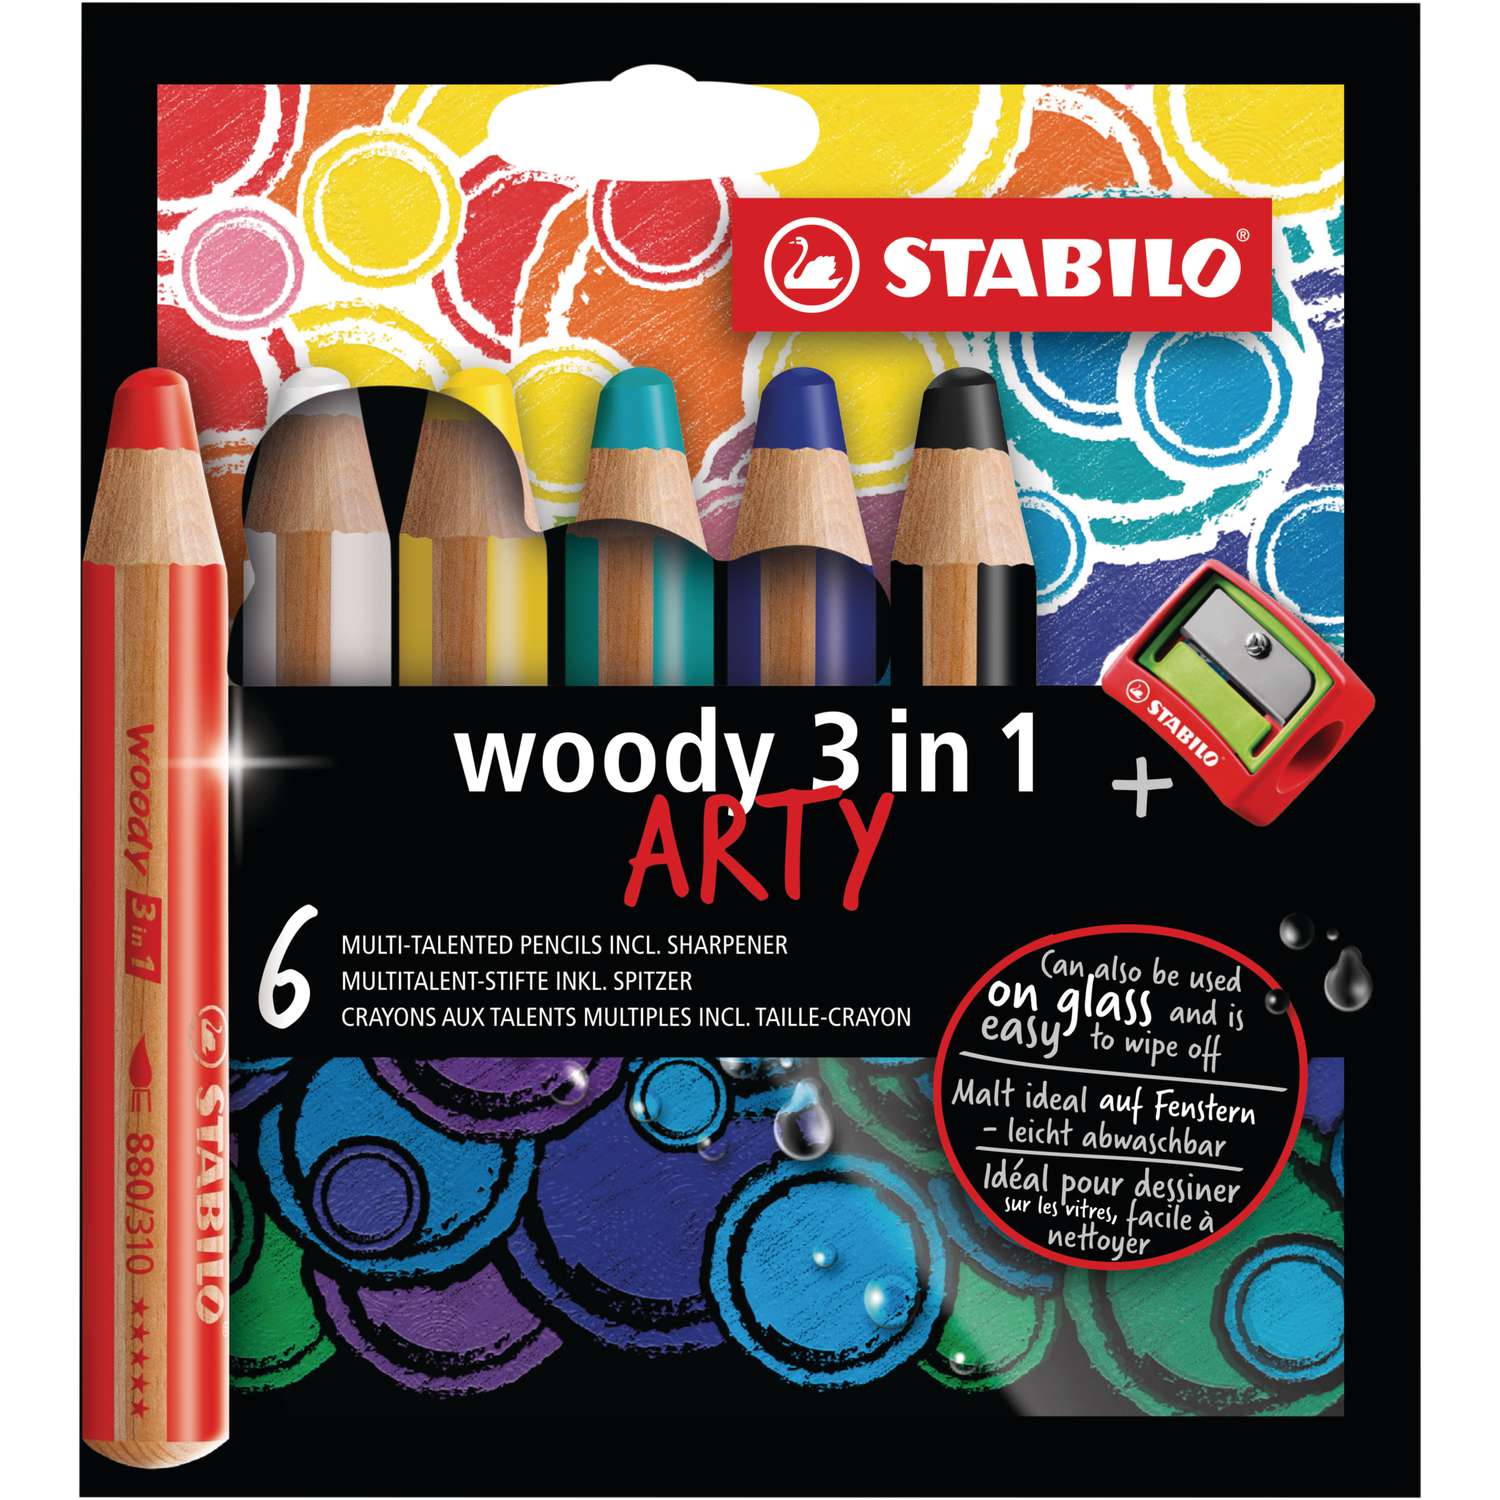 Crayon blanc all stabilo mine grasse - Articles scolaires